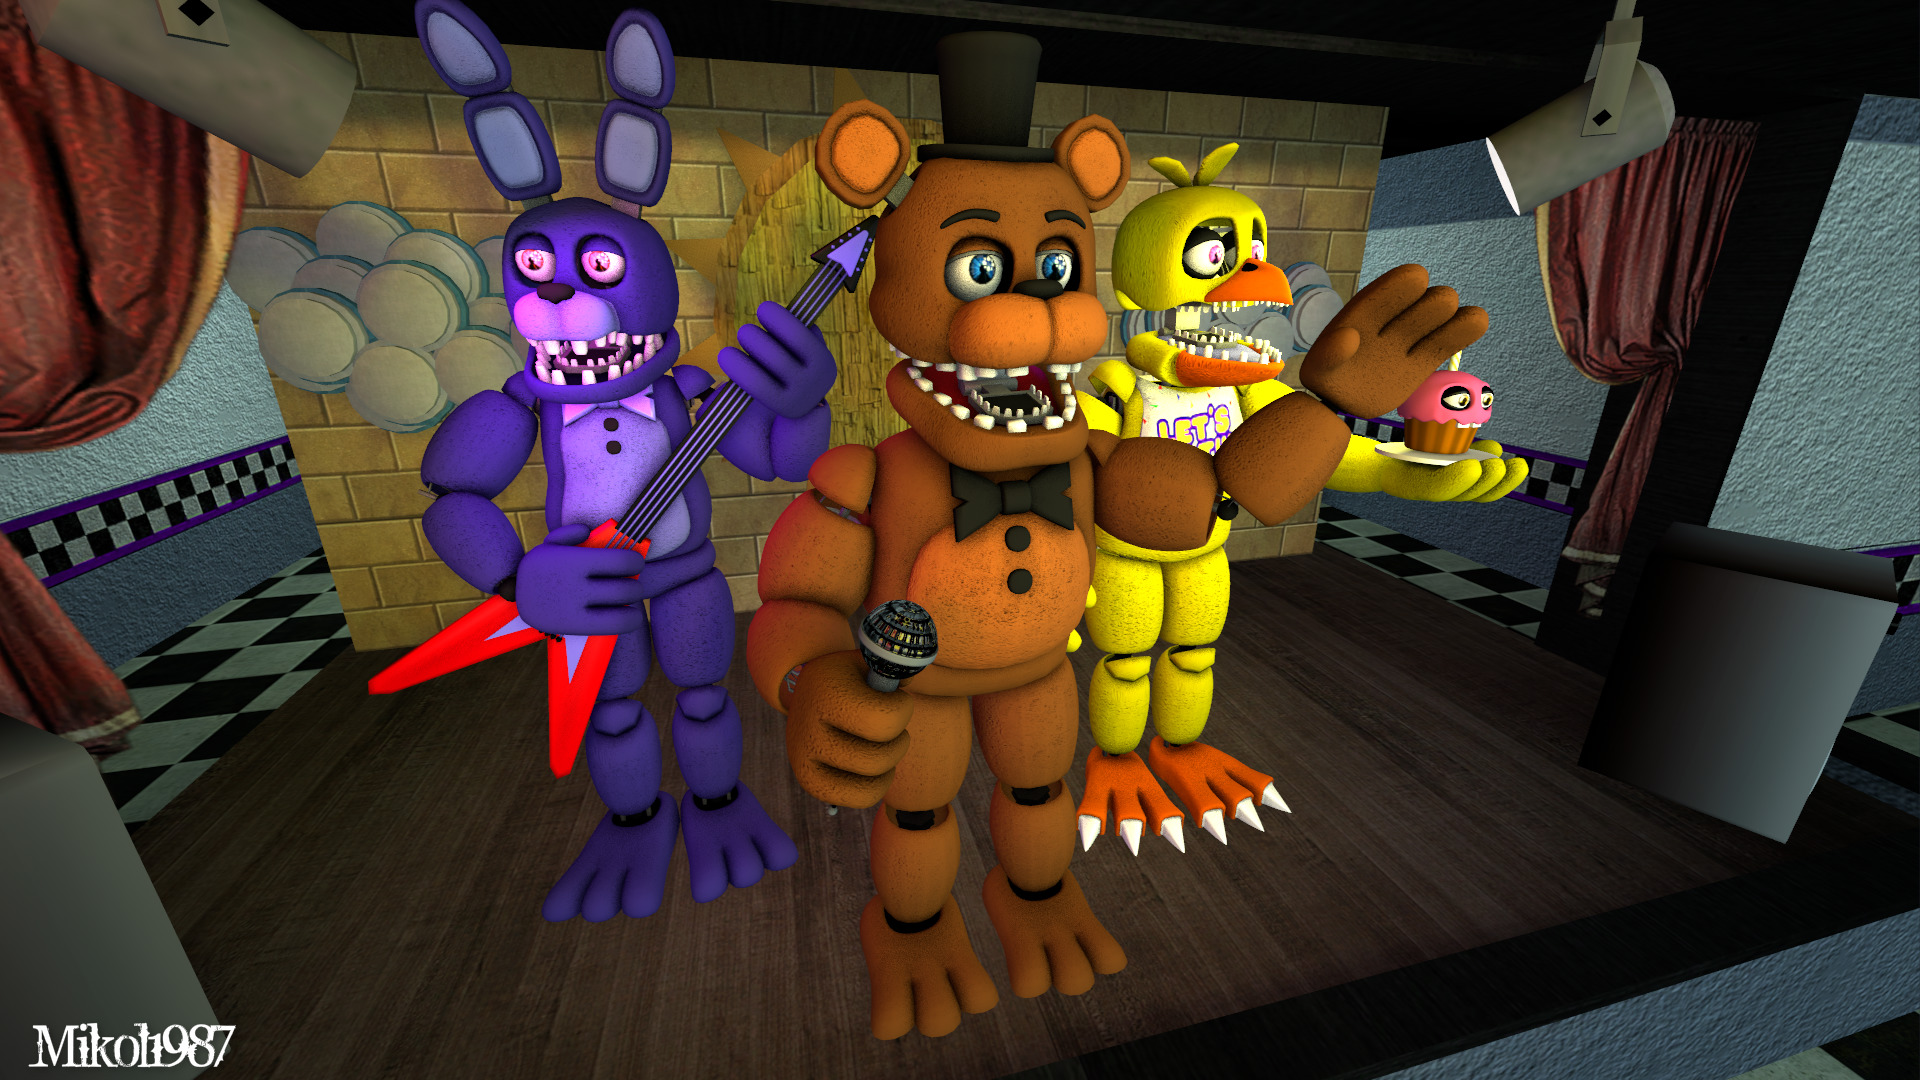 five nights at freddy's 2, video game, five nights at freddy's